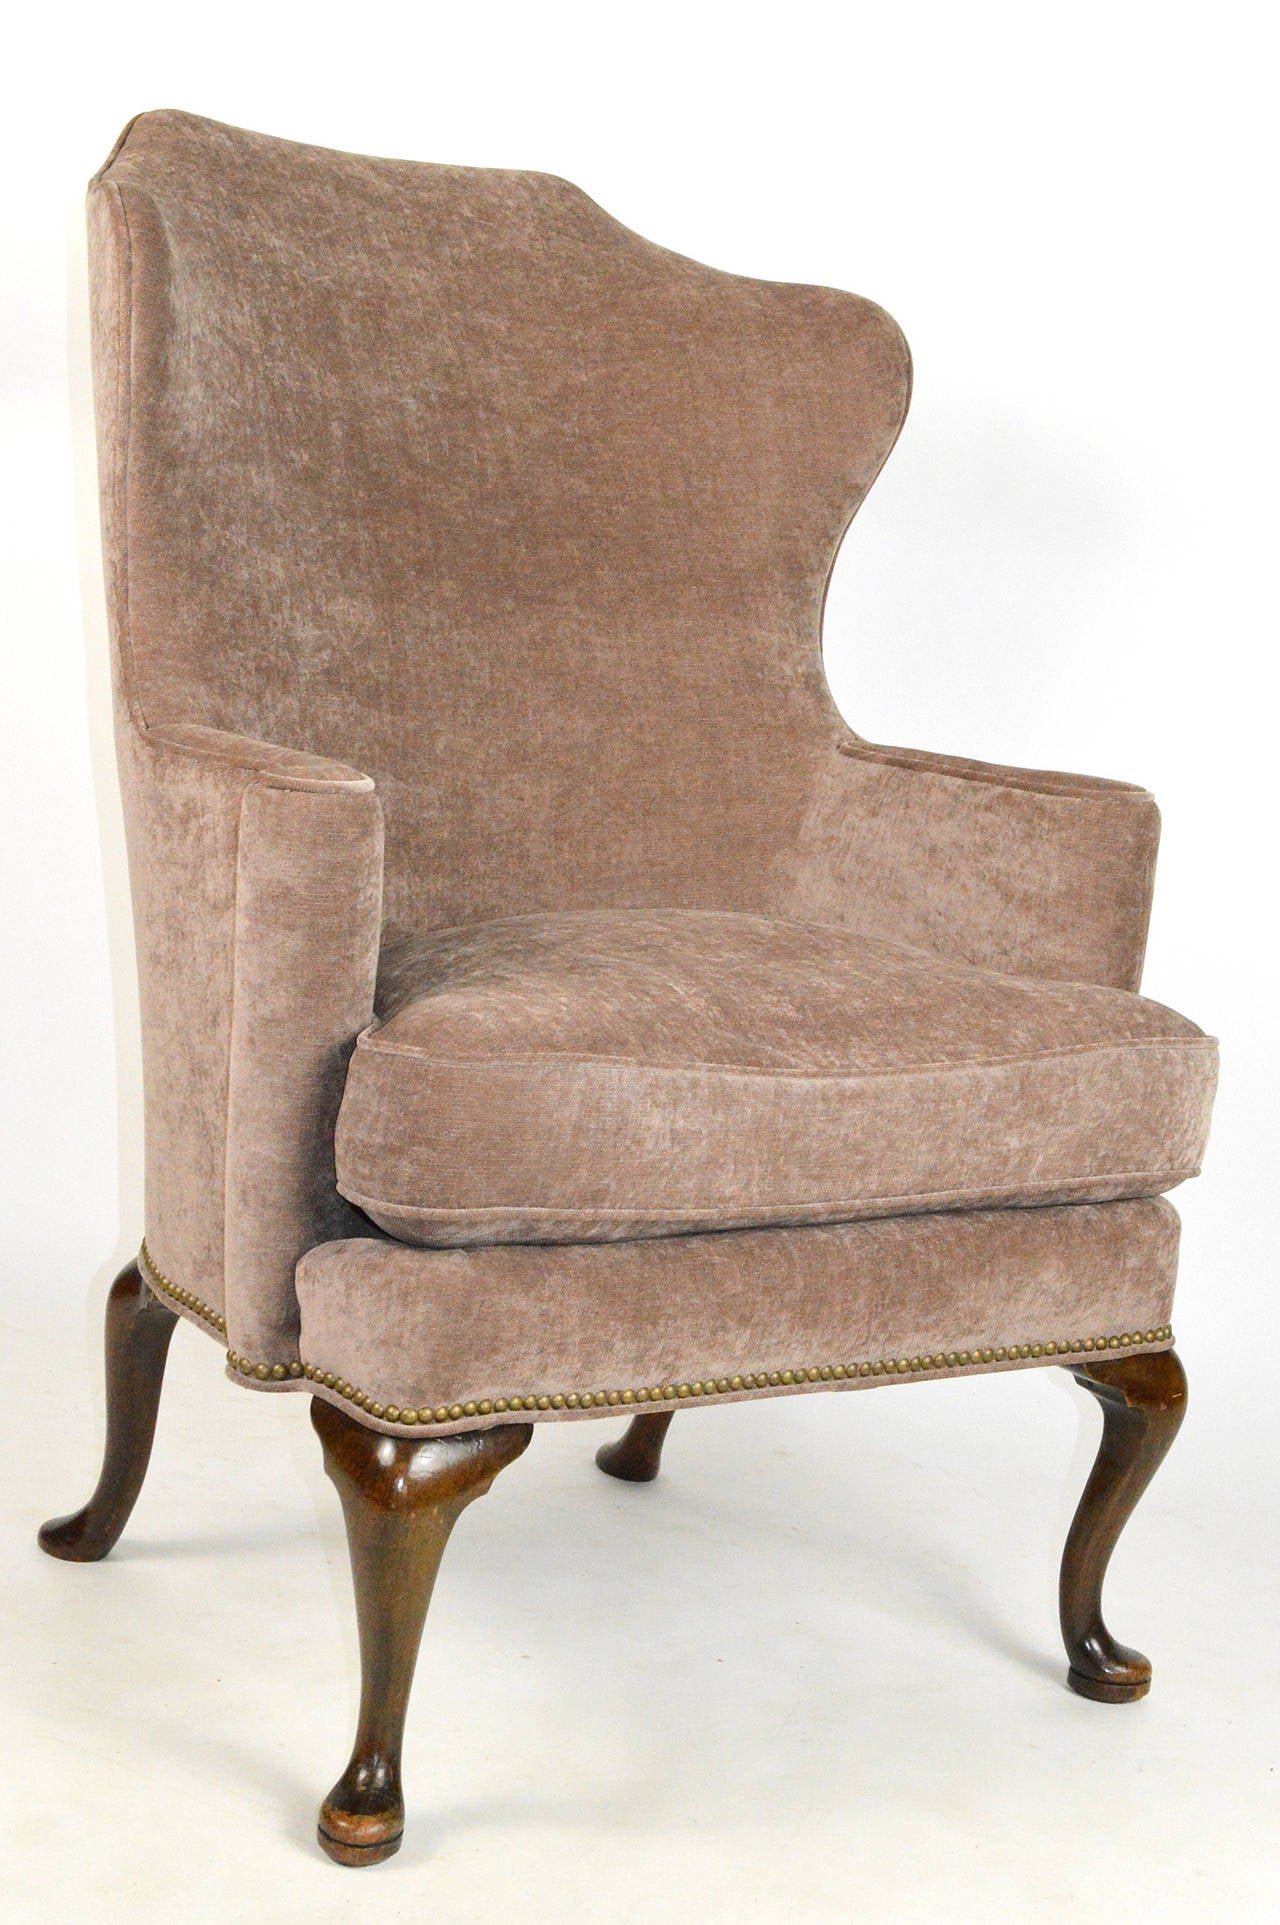 A handsome George II style walnut wing chair. Having a high curved back and out scrolled arms. Finished with nailhead trim. Raised on cabriole legs with pad feet.